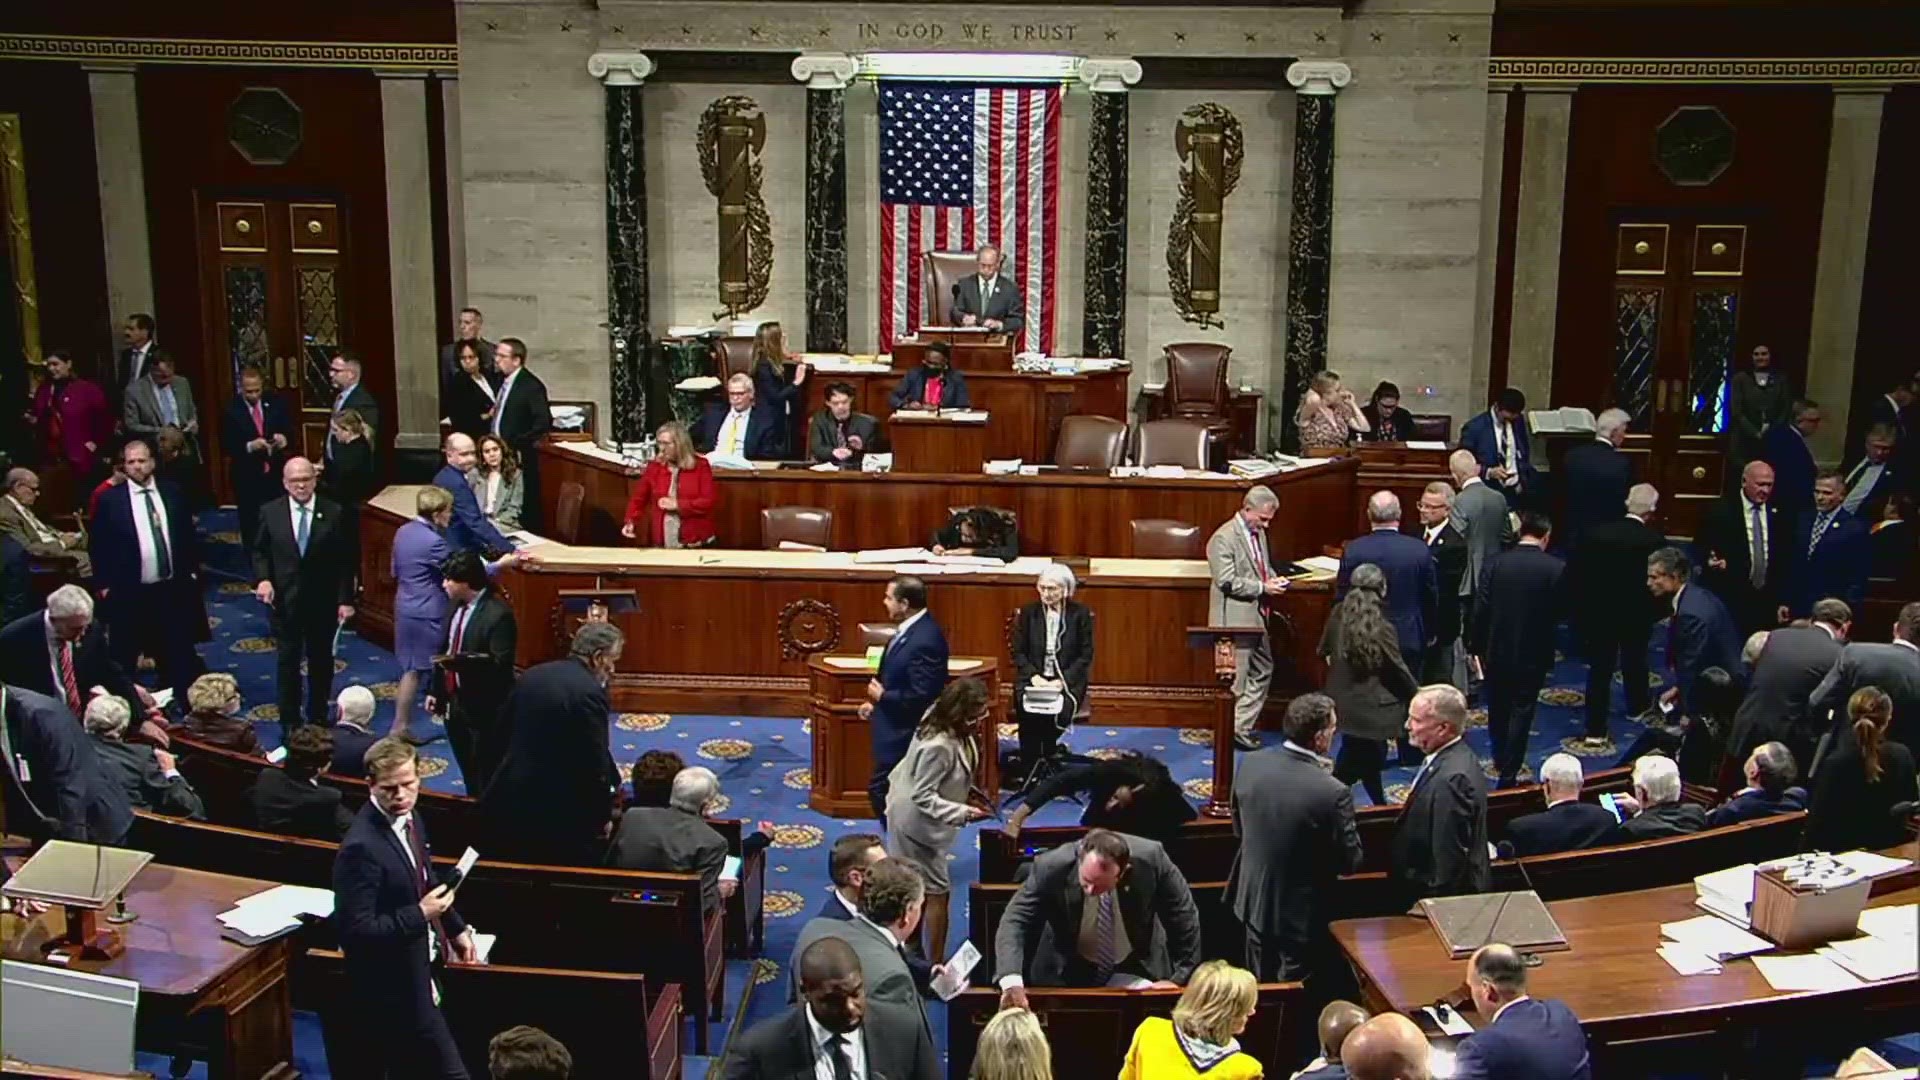 Several Republican representatives blocked the vote from going through.